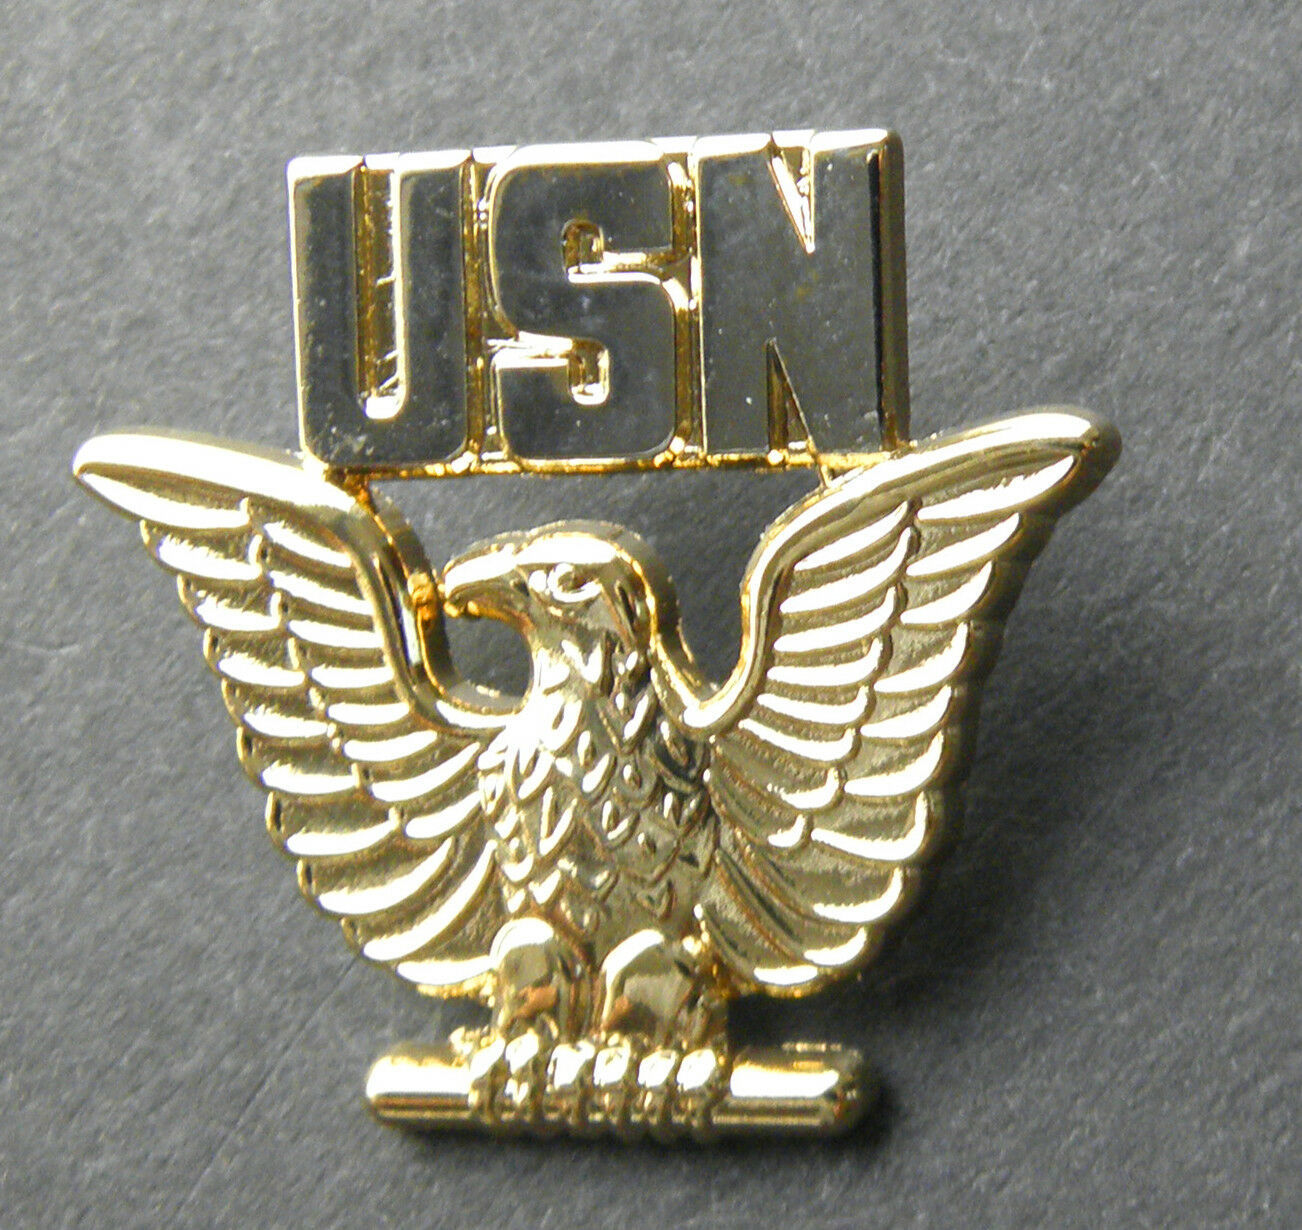 US NAVY USN ENLISTED GOLD SILVER COLORED EAGLE LAPEL PIN BADGE 1 INCH - $5.64